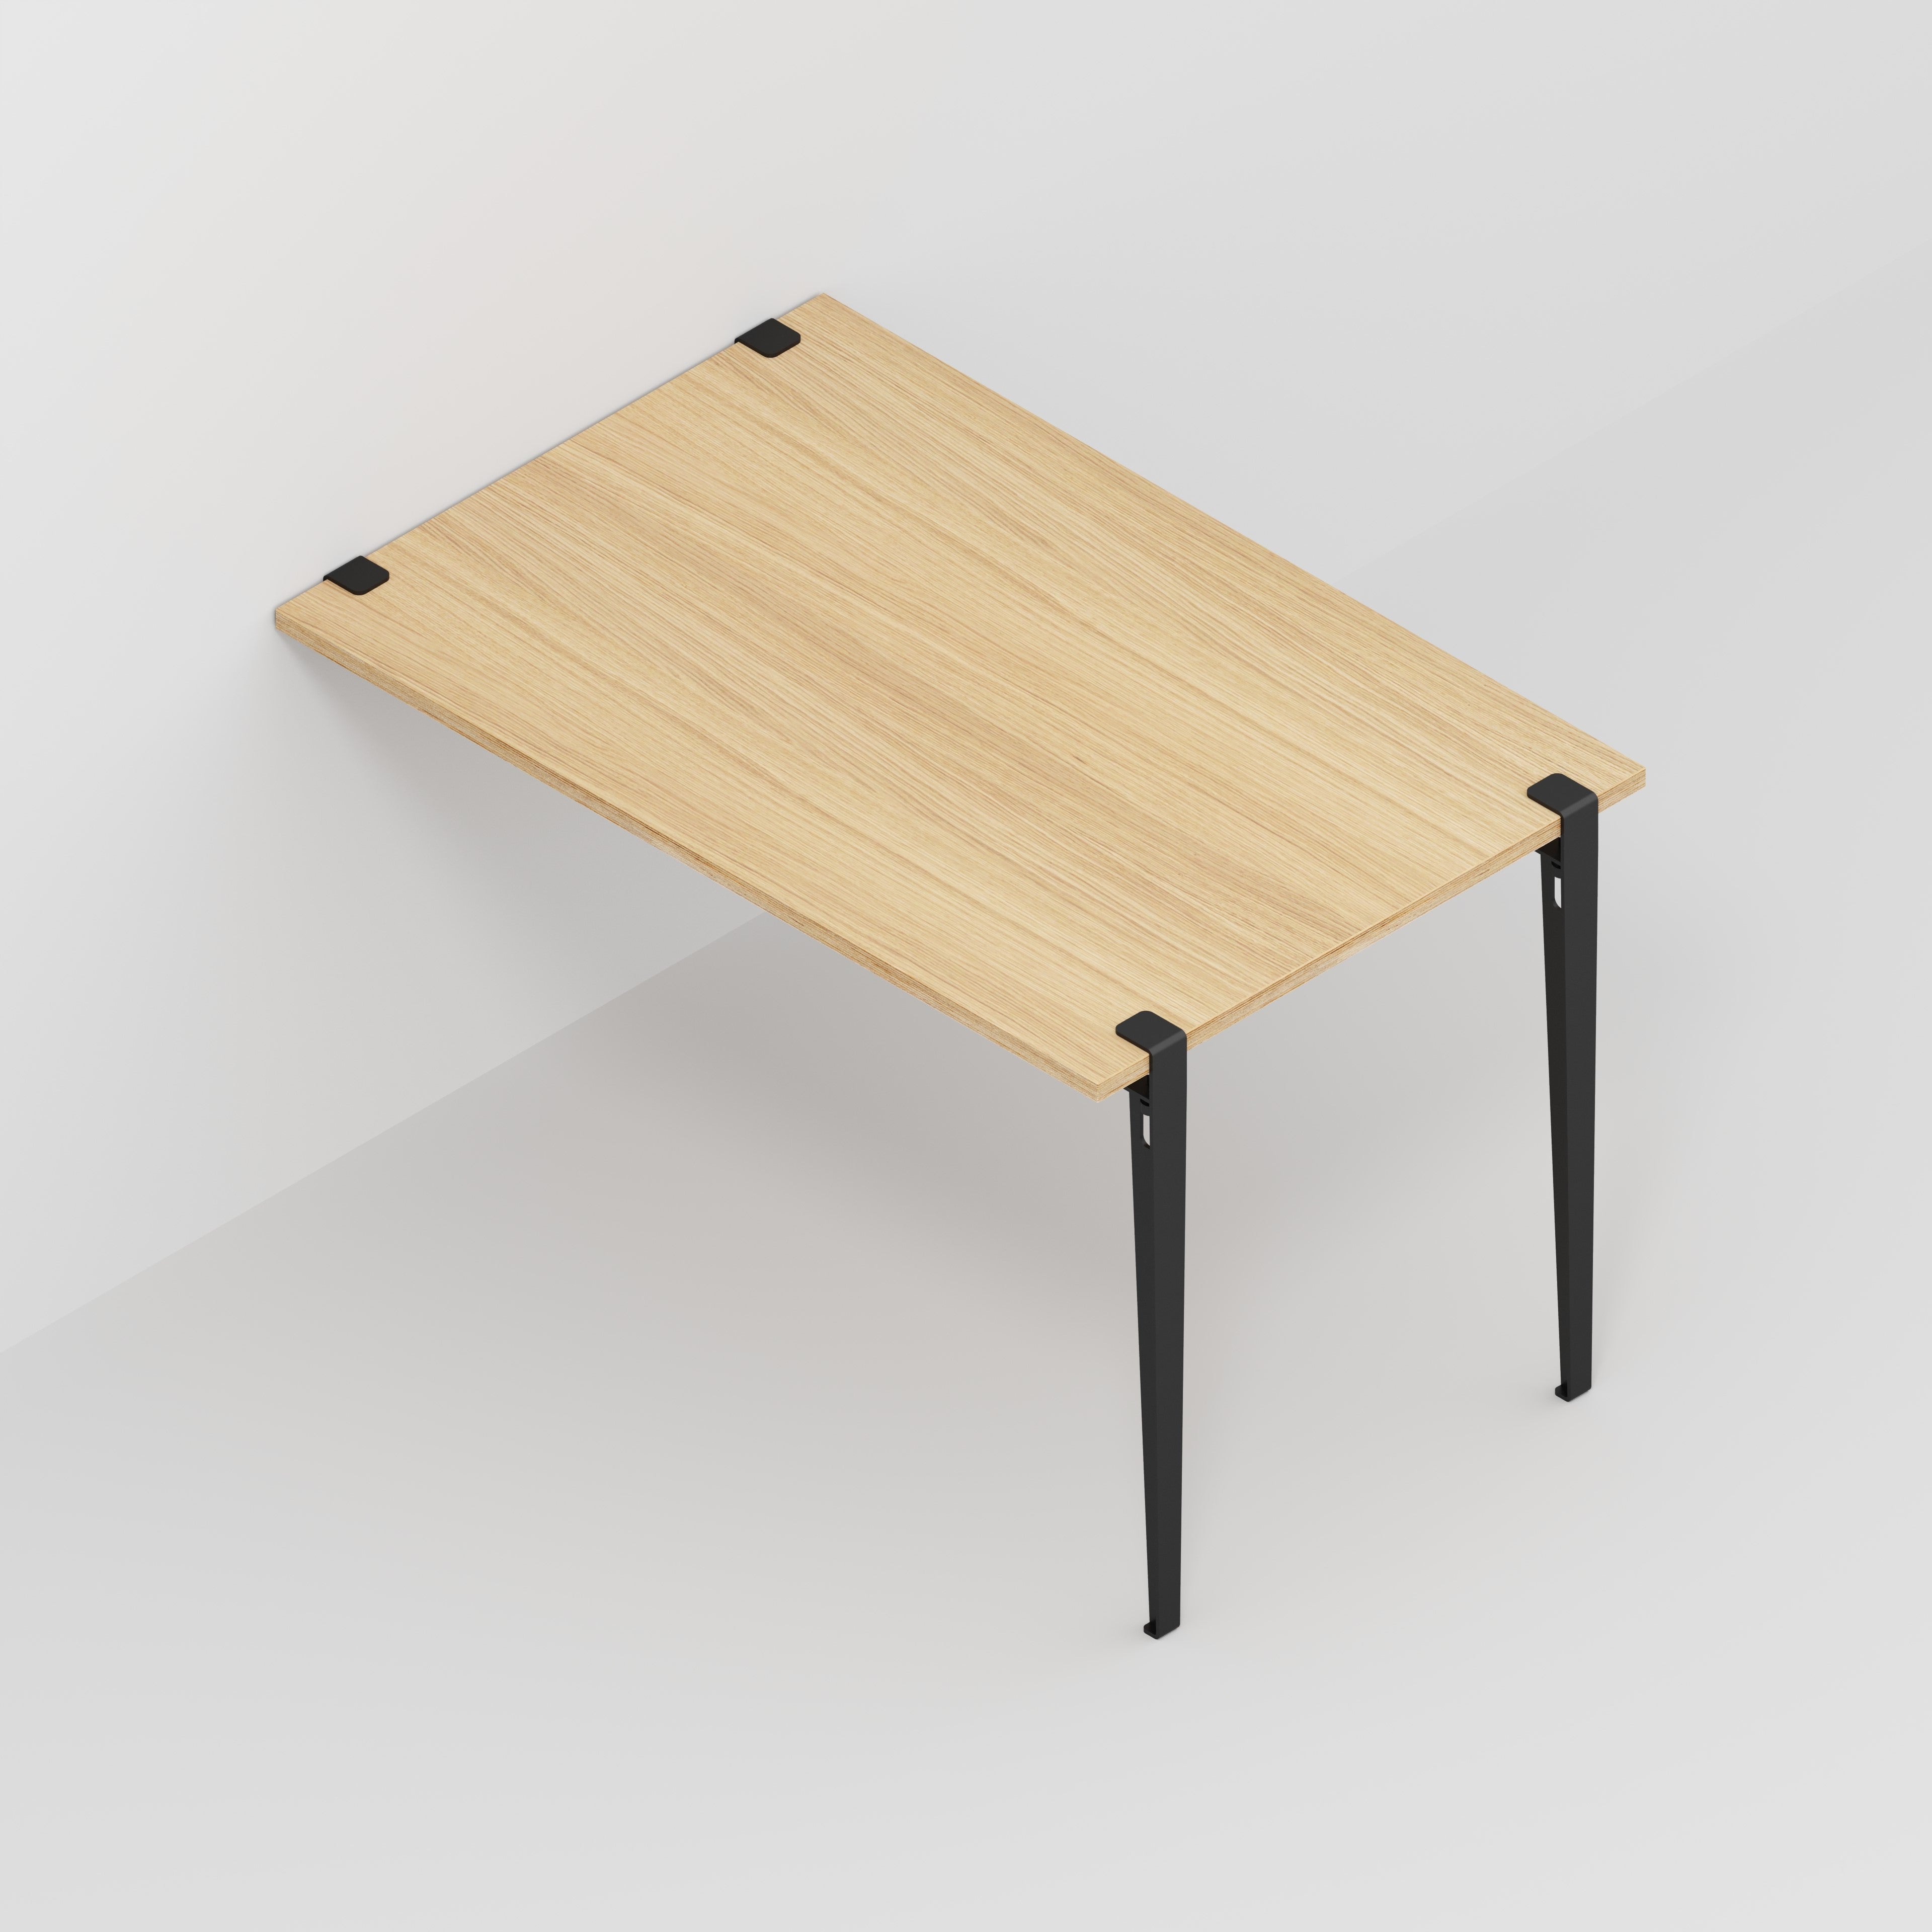 Wall Table with Black Tiptoe Legs and Brackets - Plywood Oak - 1200(w) x 800(d) x 750(h)